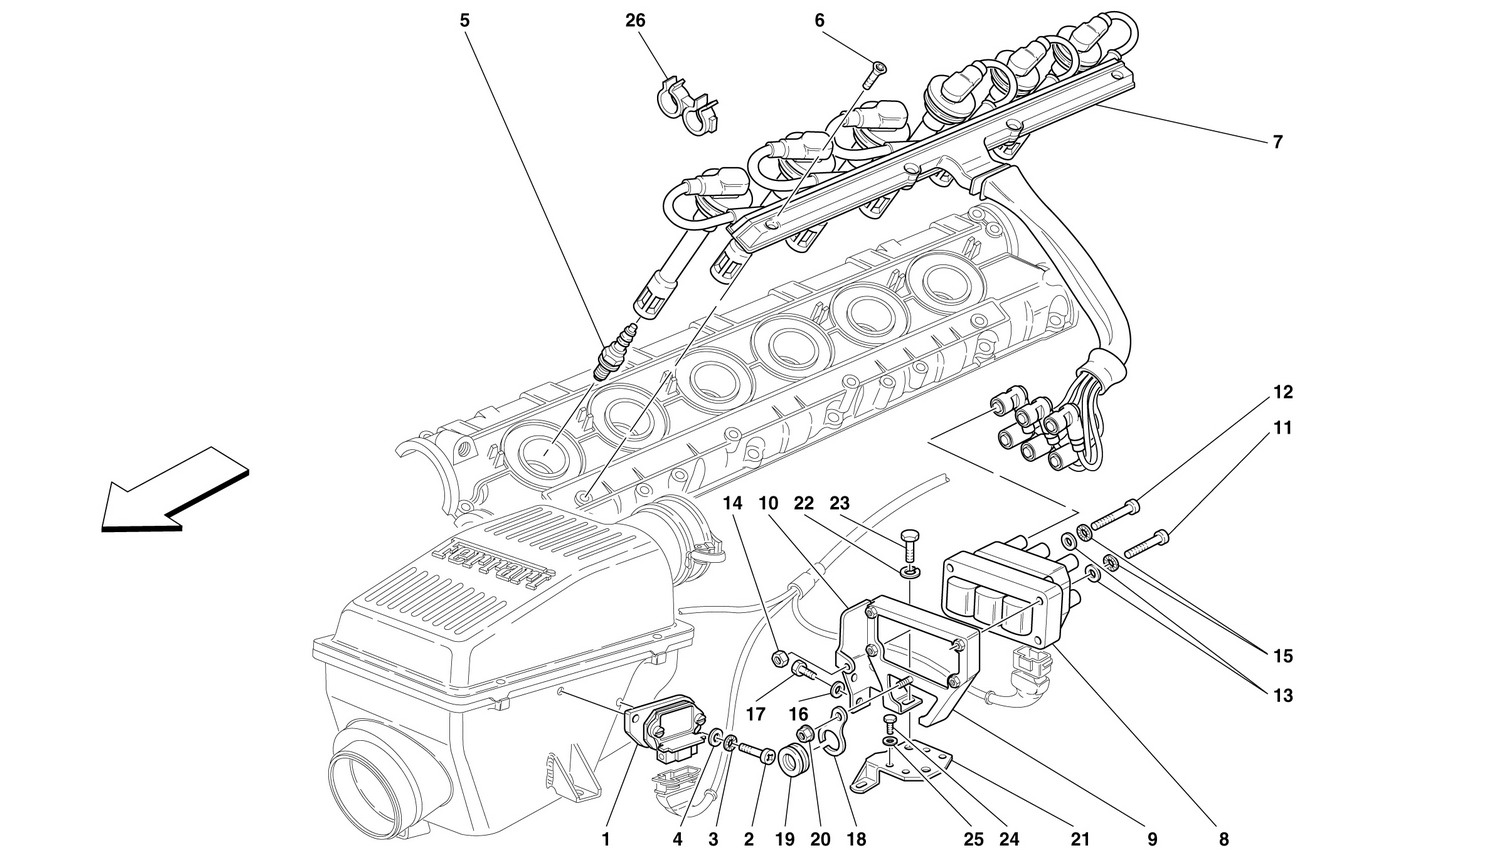 Schematic: Ignition Device